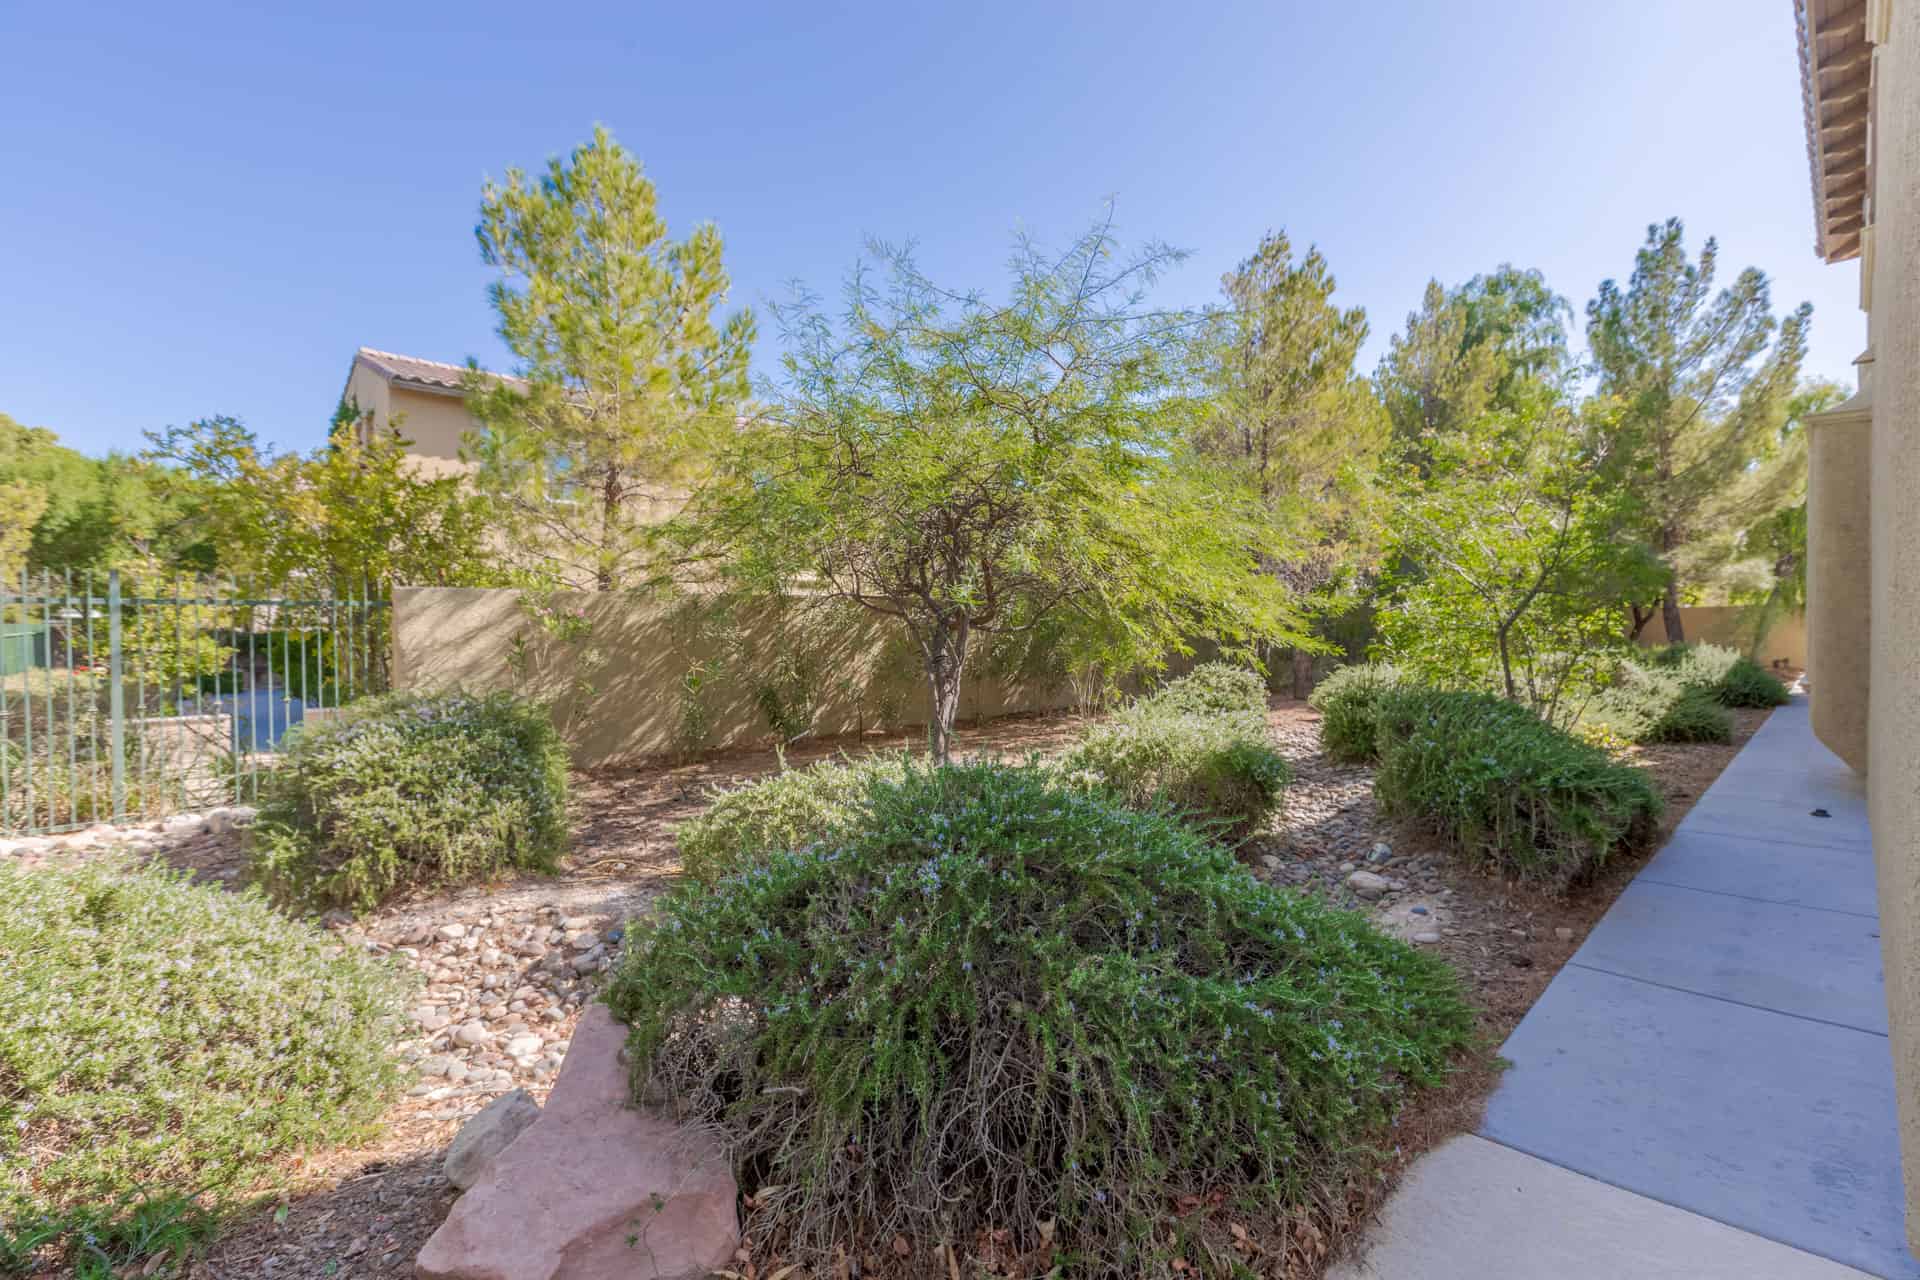 las-vegas-luxry-real-estate-realtor-rob-jensen-company-11772-canons-brooks-drive-southern-highlands44